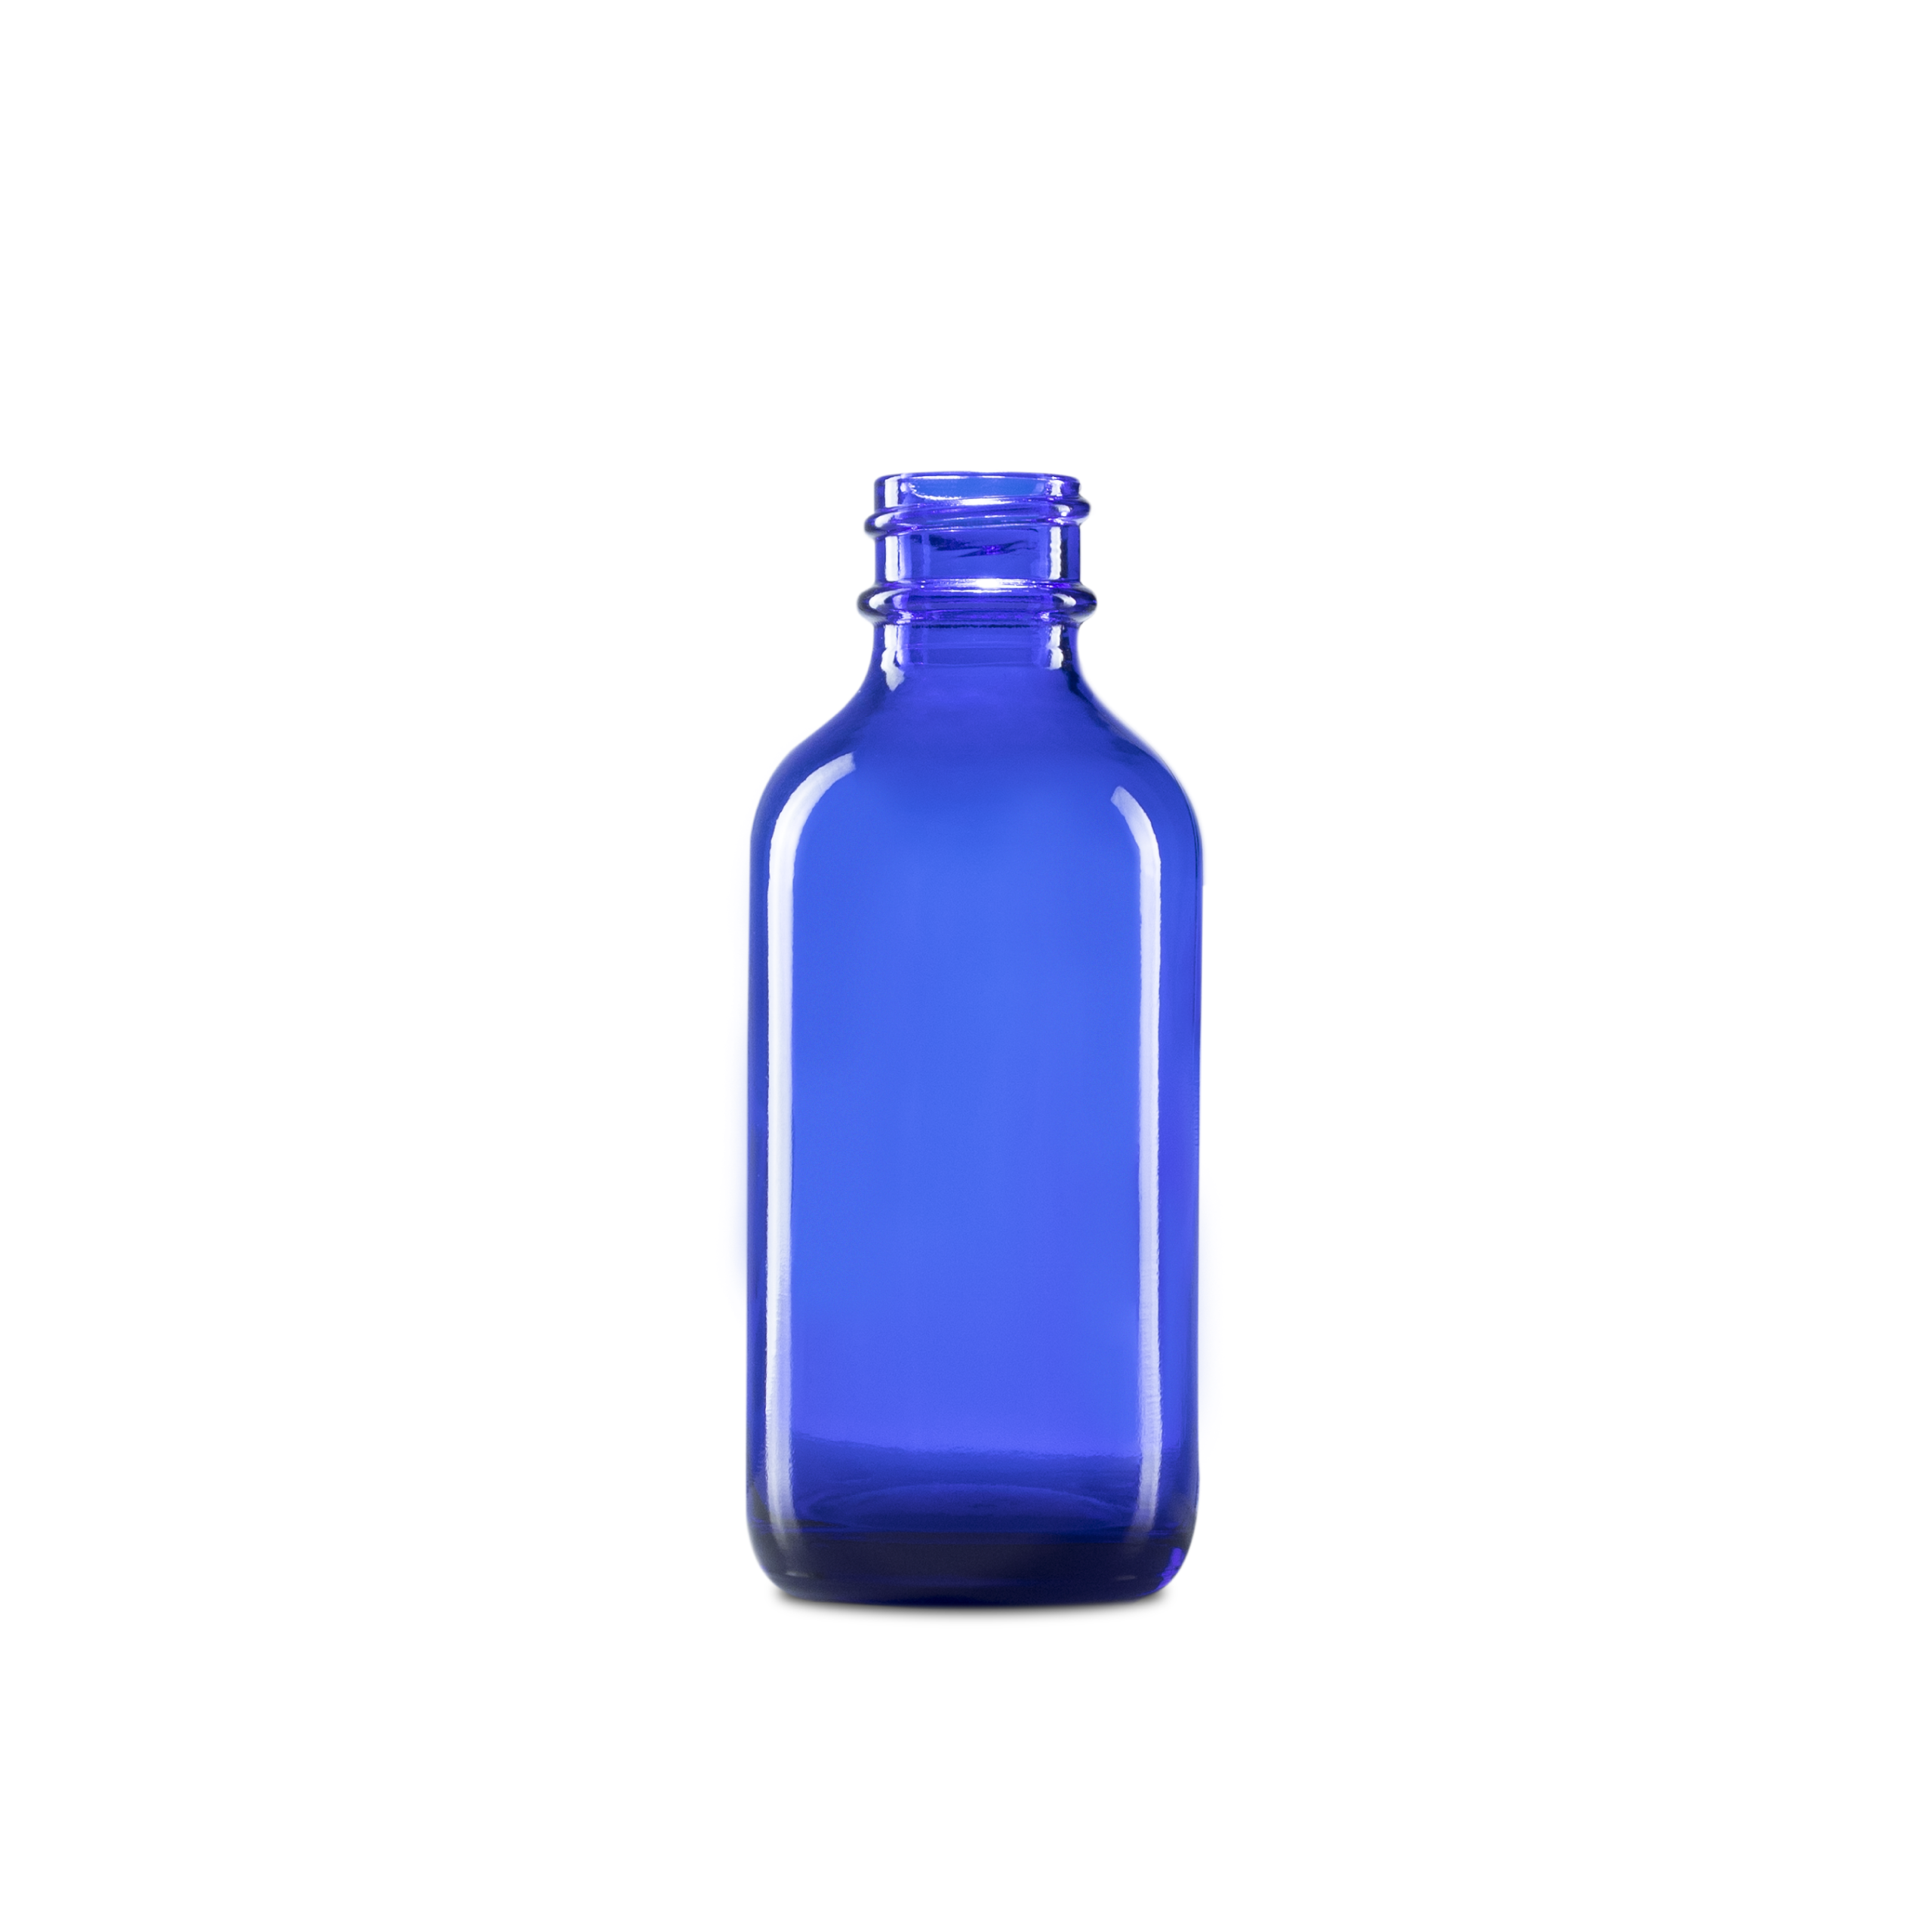 2 oz blue glass bottle are reusable and recyclable, which makes them eco friendly and sustainable.